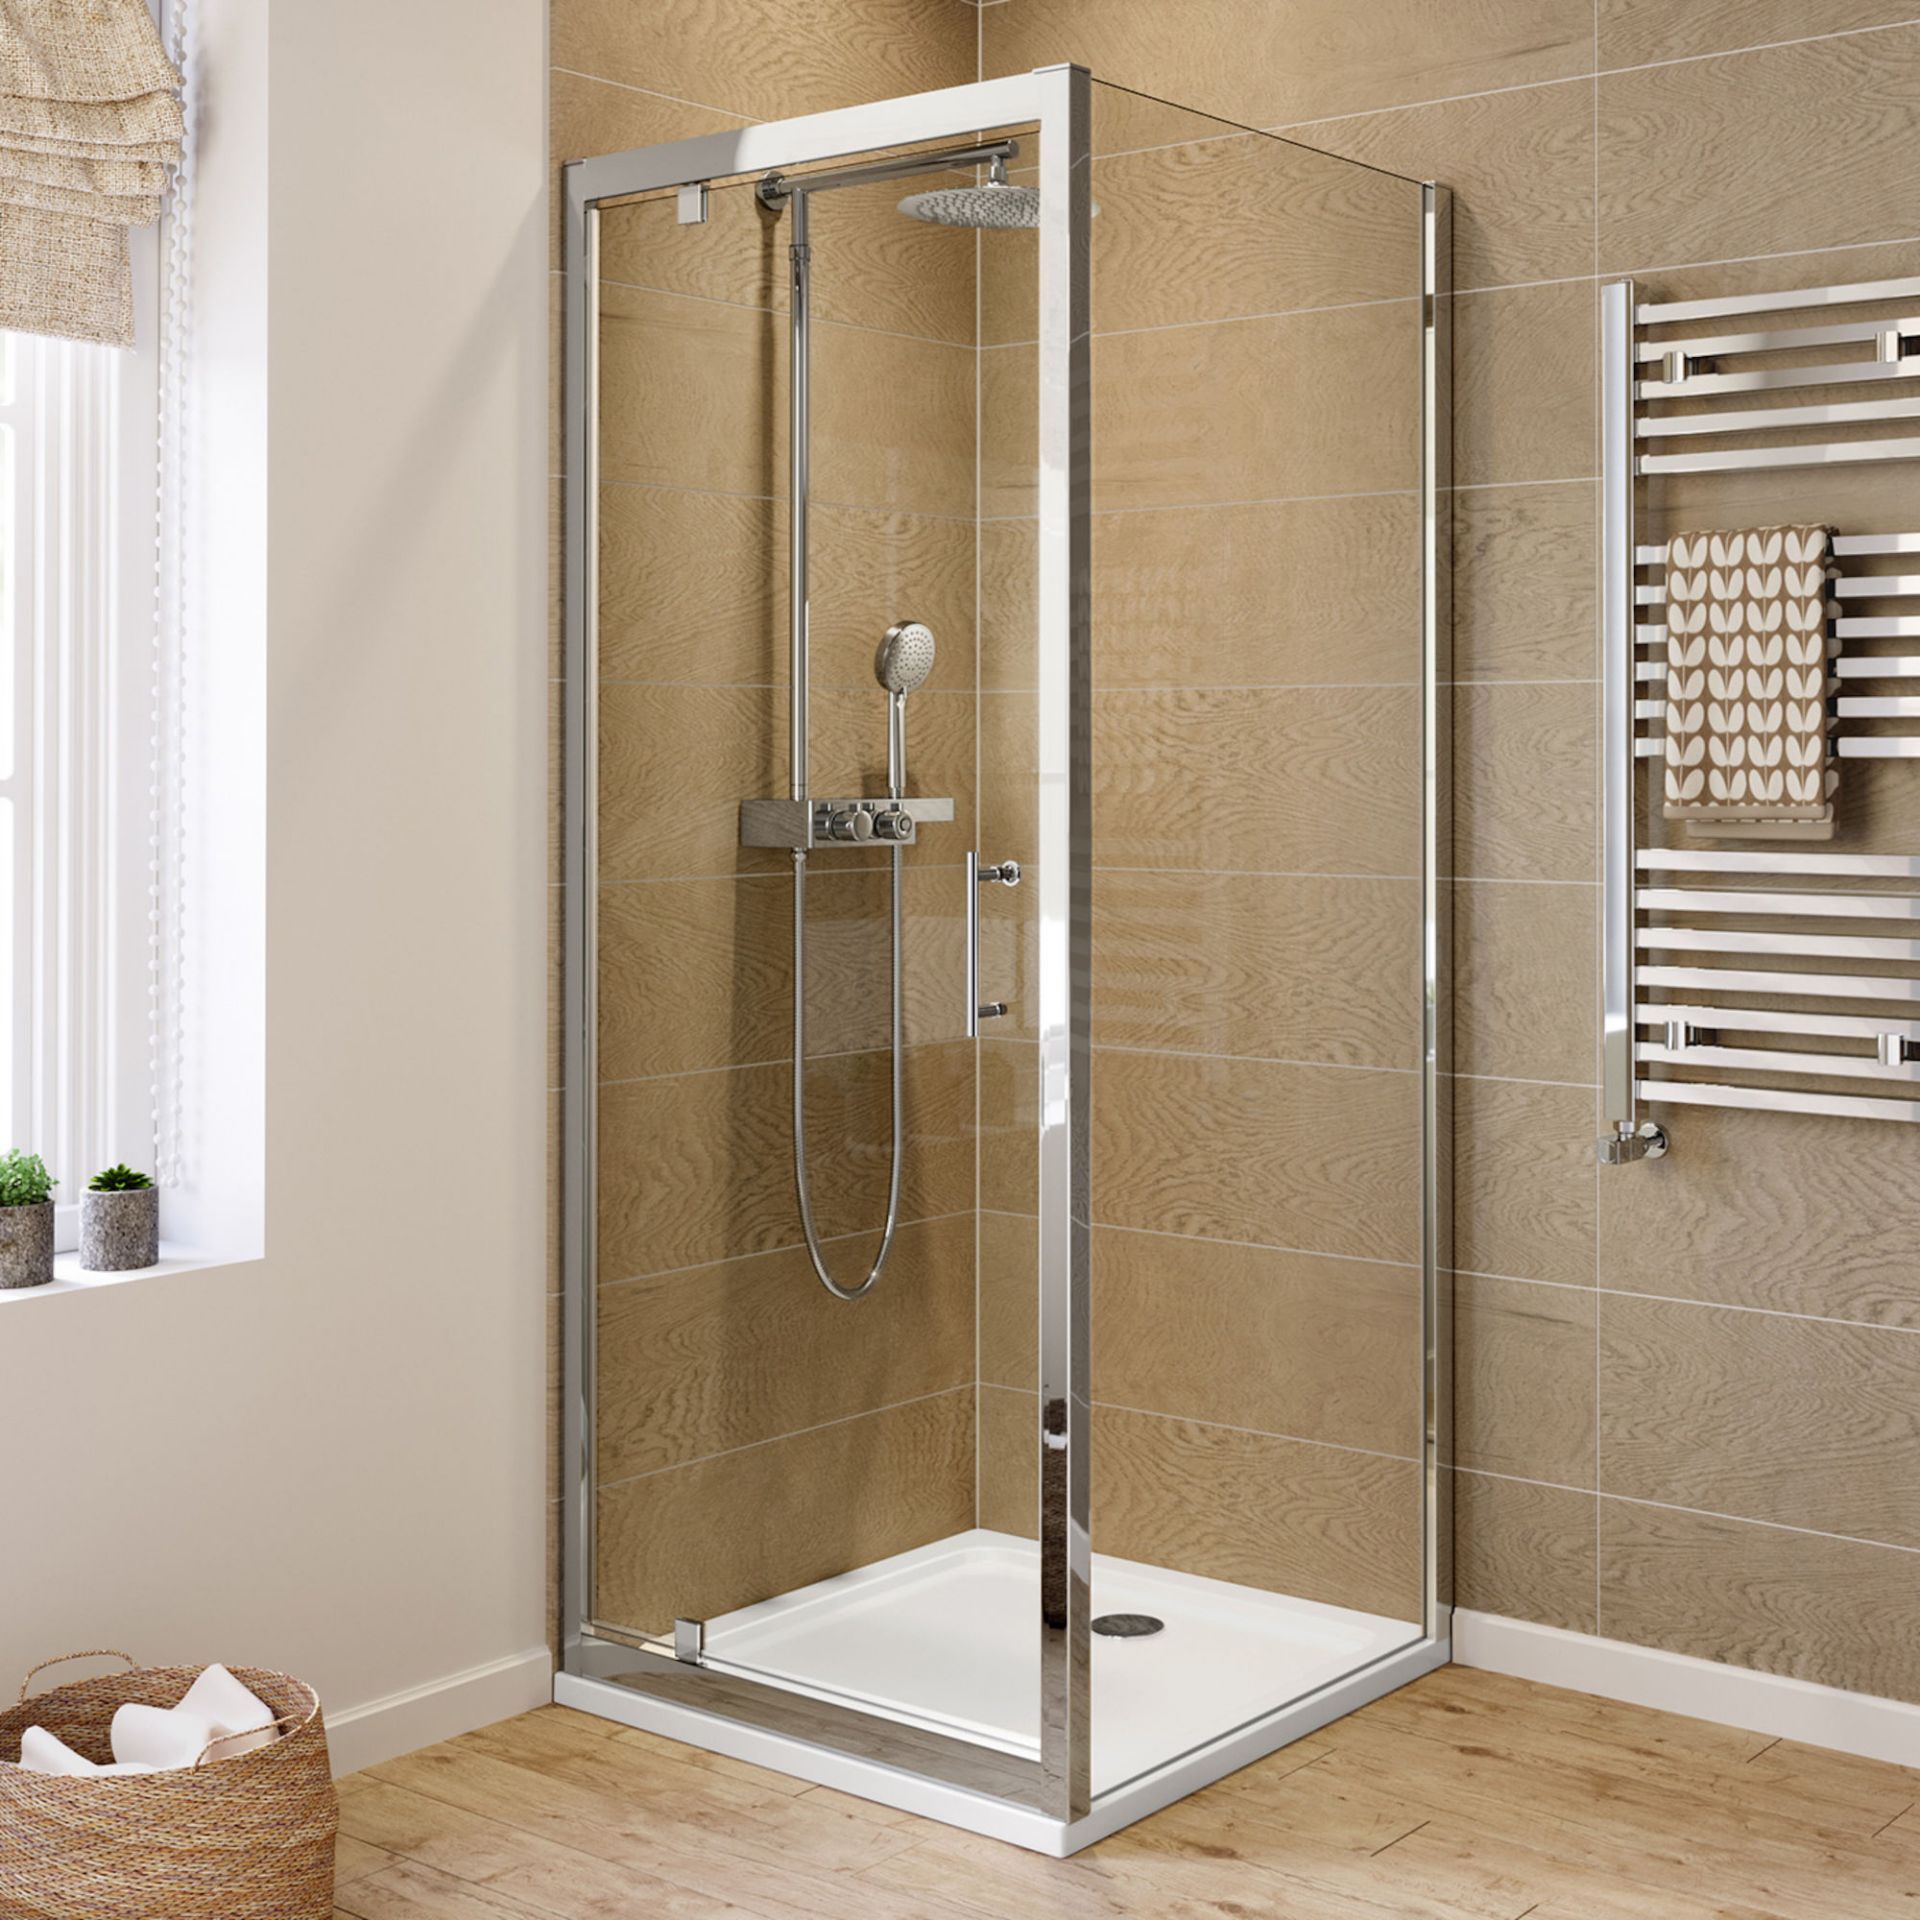 NEW 700x760mm - 6mm - Elements Pivot Door Shower Enclosure. RRP £330.99.6mm Safety Glass Full...